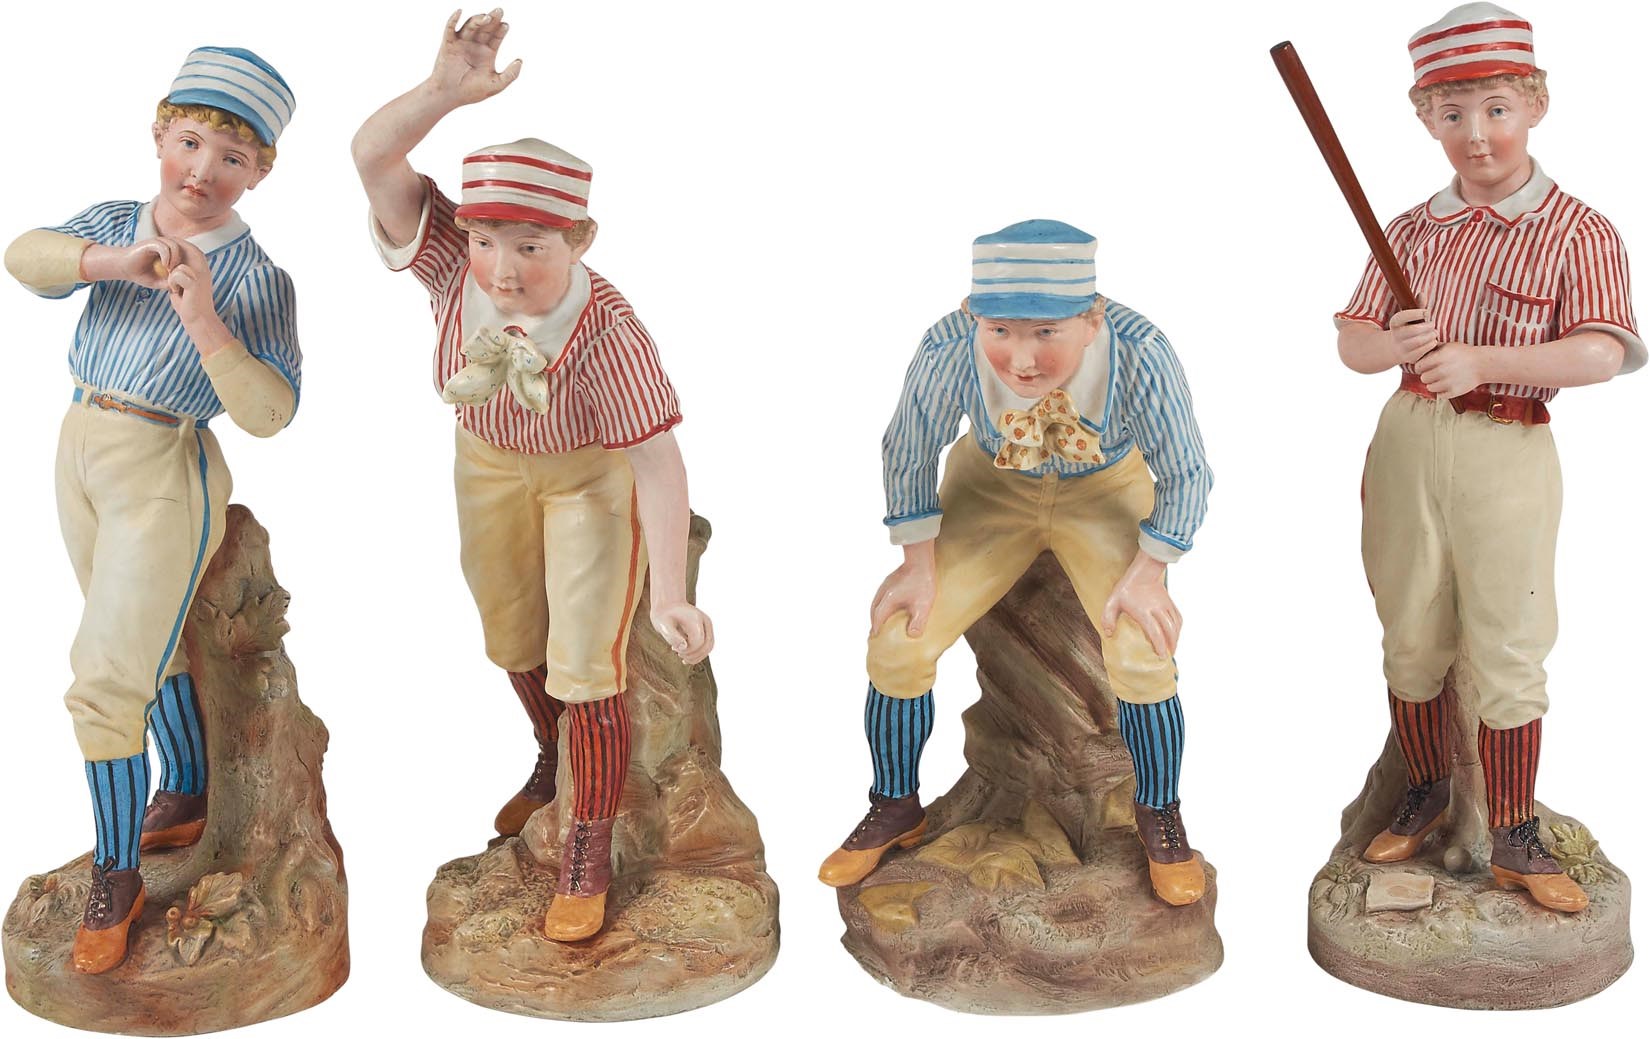 - 1880s Heubach GIANT Baseball Bisque Figures (4) - Finest of the Two Known Sets